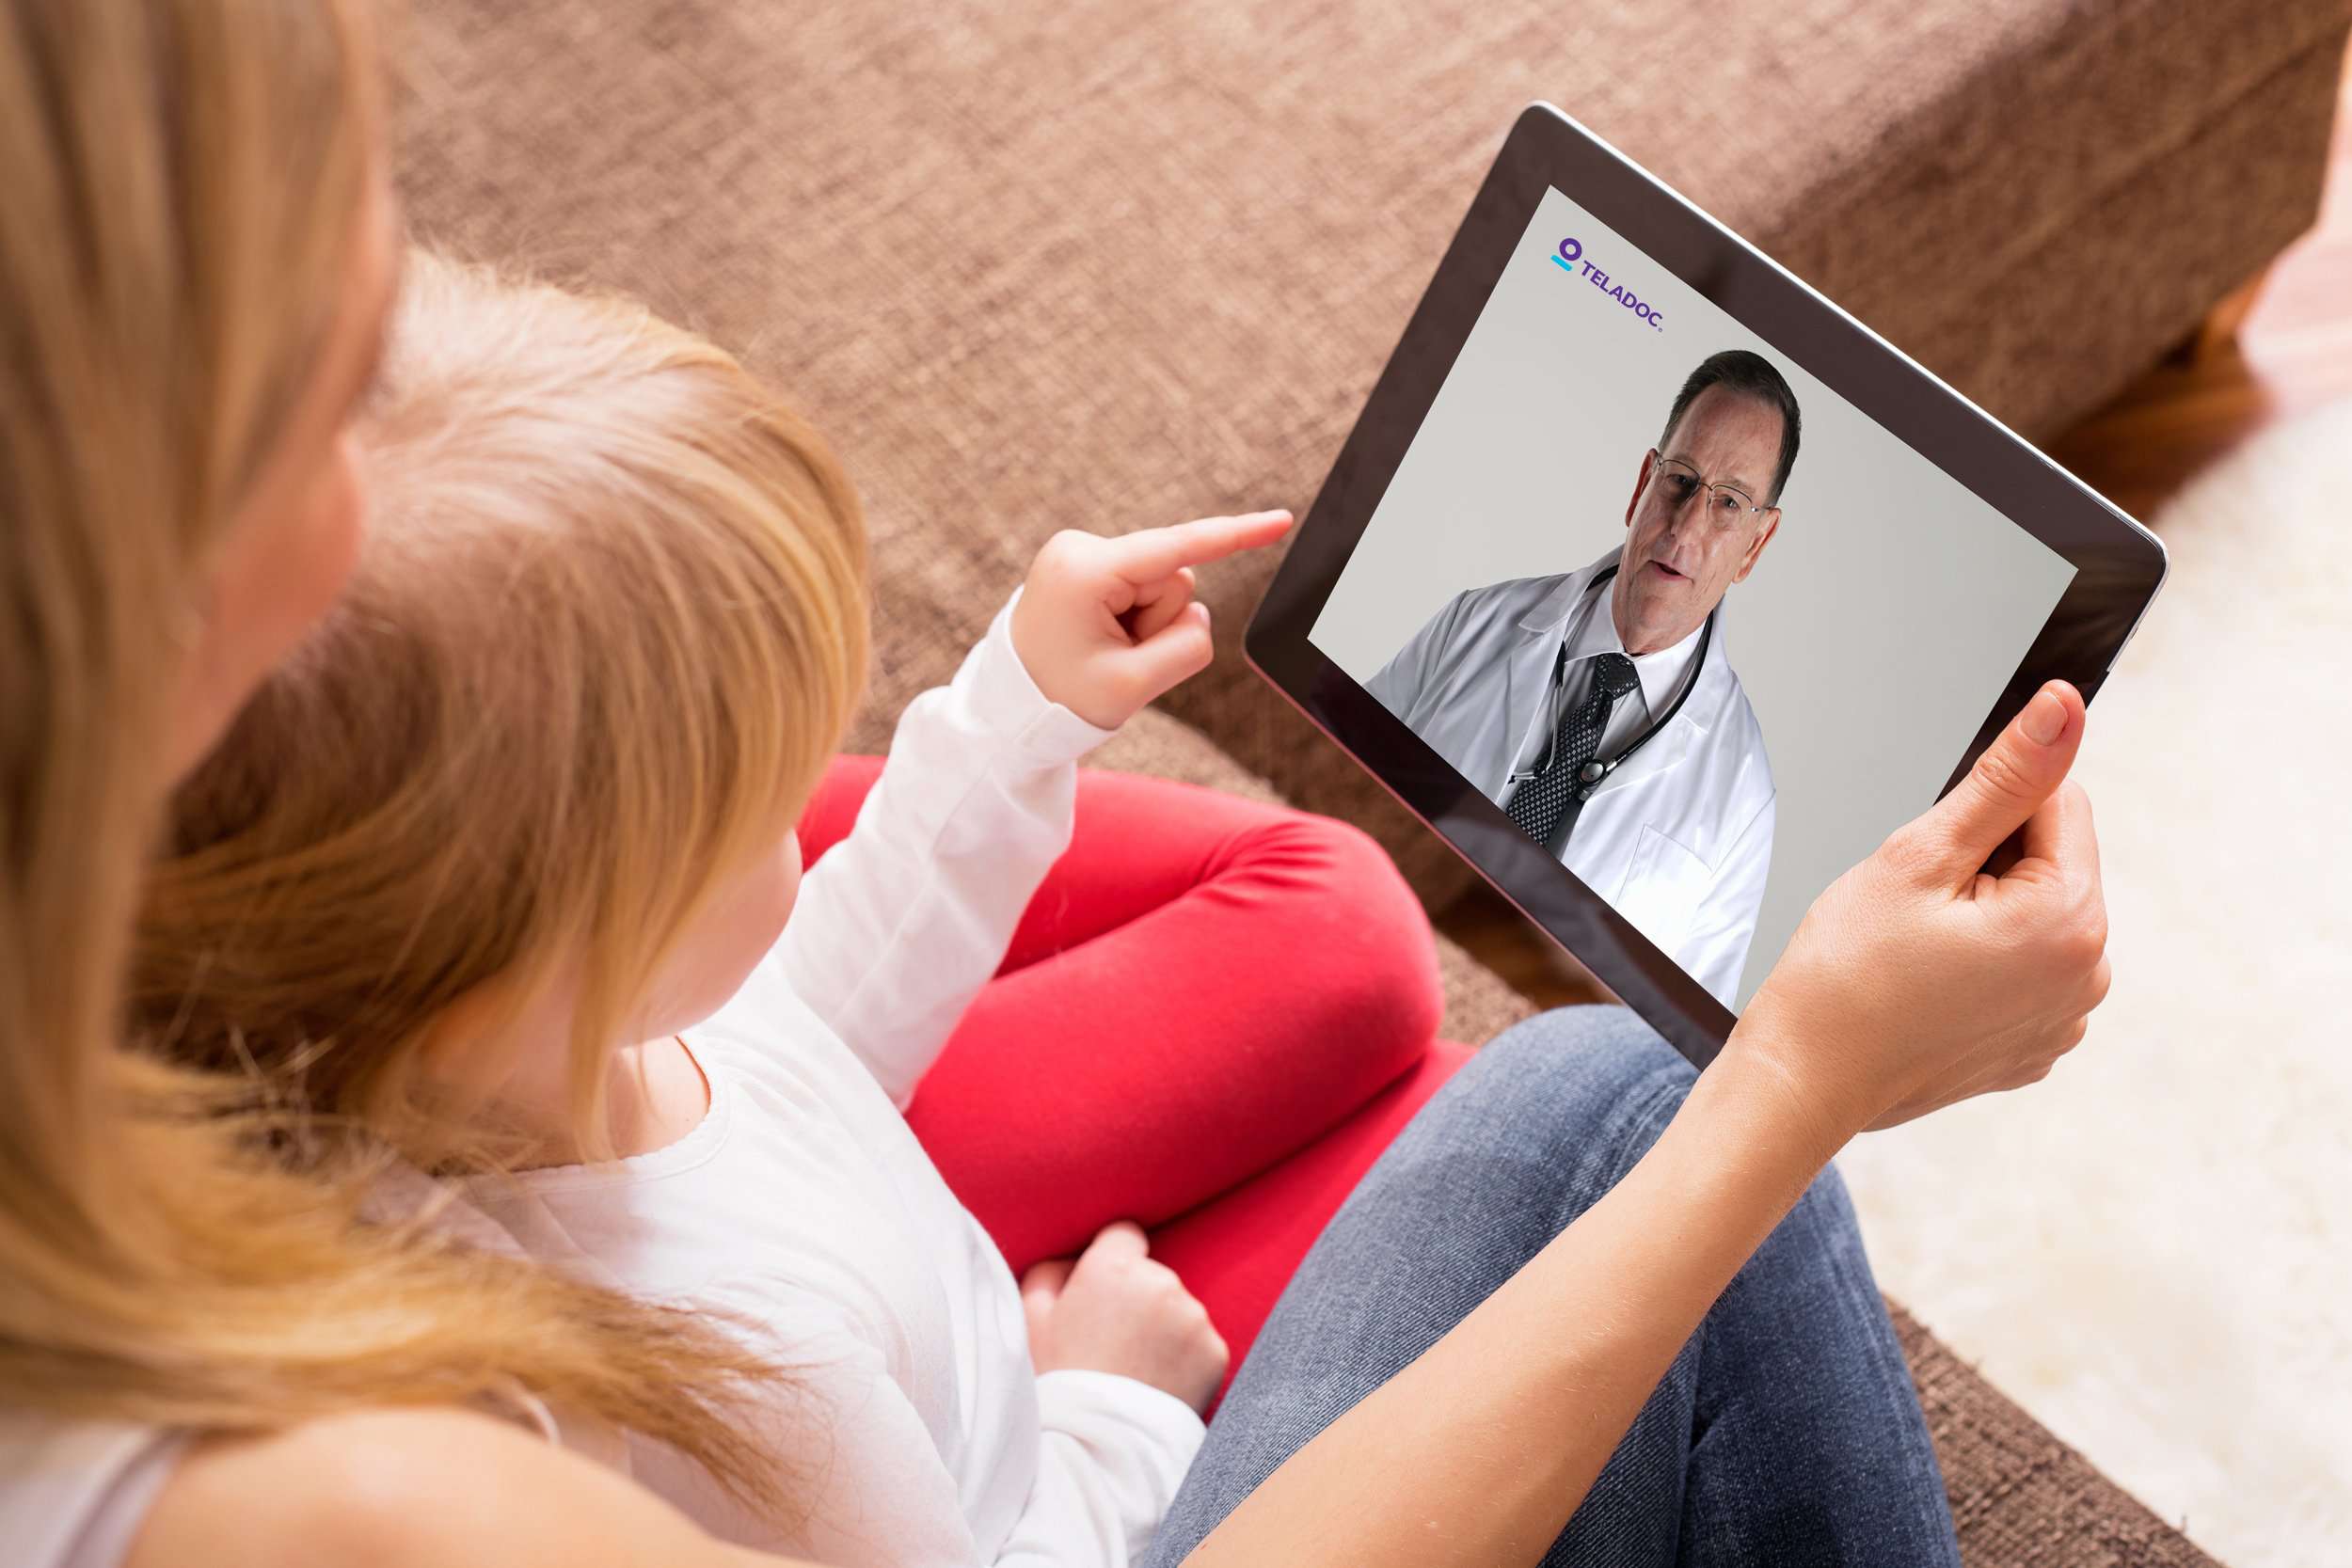 With pending Livongo deal, Teladoc's virtual care business is booming